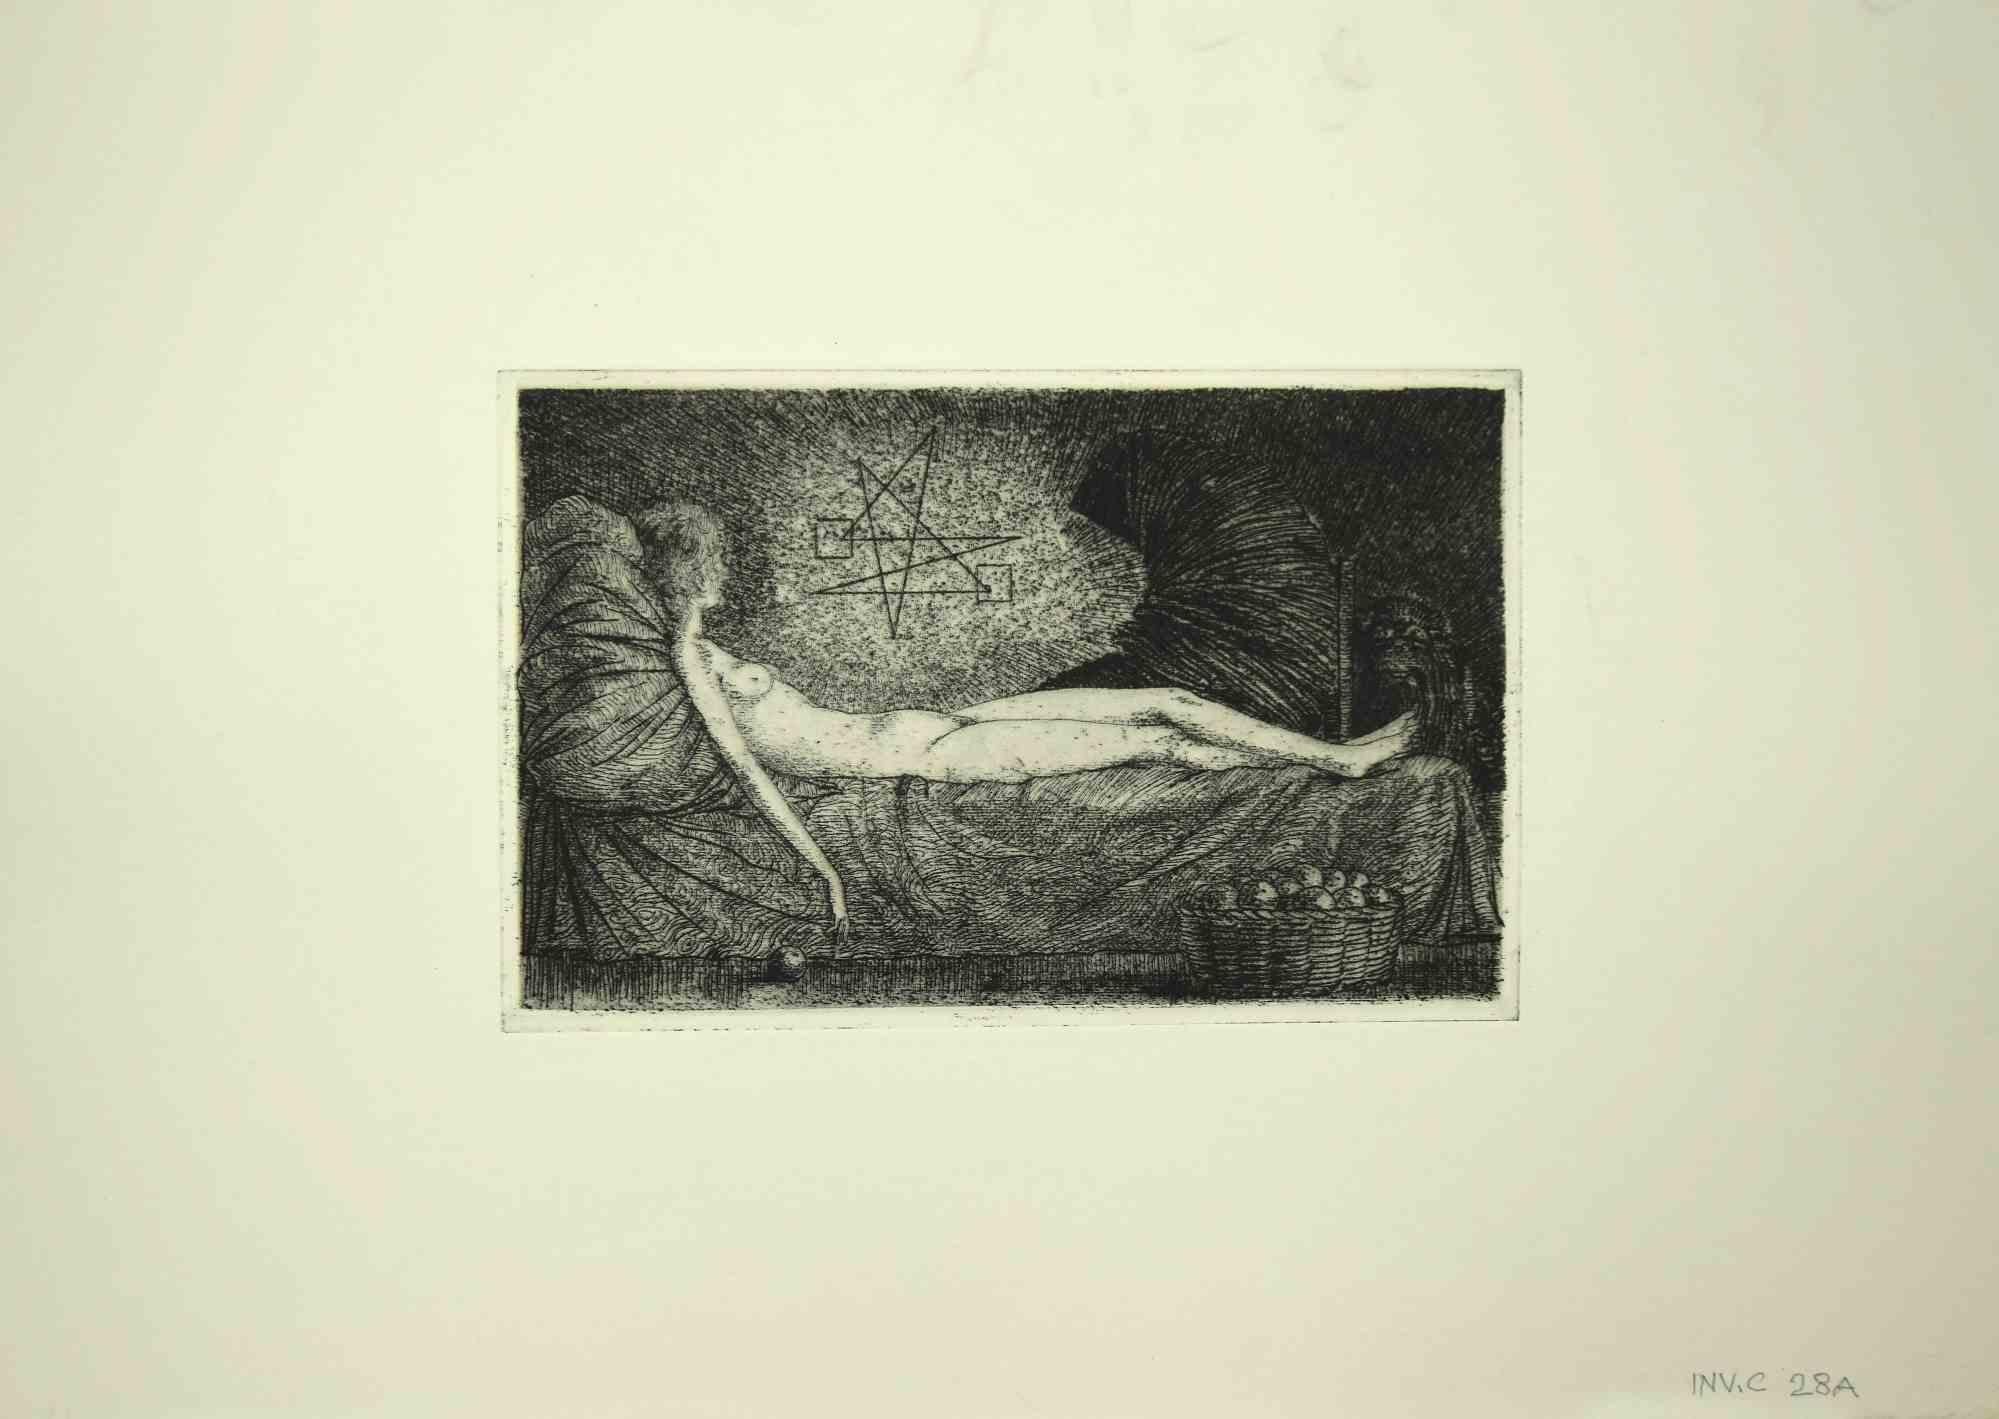 Reclined Nude is an original etching on paper realized by Leo Guida in the 1970s.

Guter Zustand.

Leo Guida  (1992 - 2017). Sensitive to current issues, artistic movements and historical techniques, Leo Guida has been able to weave with many